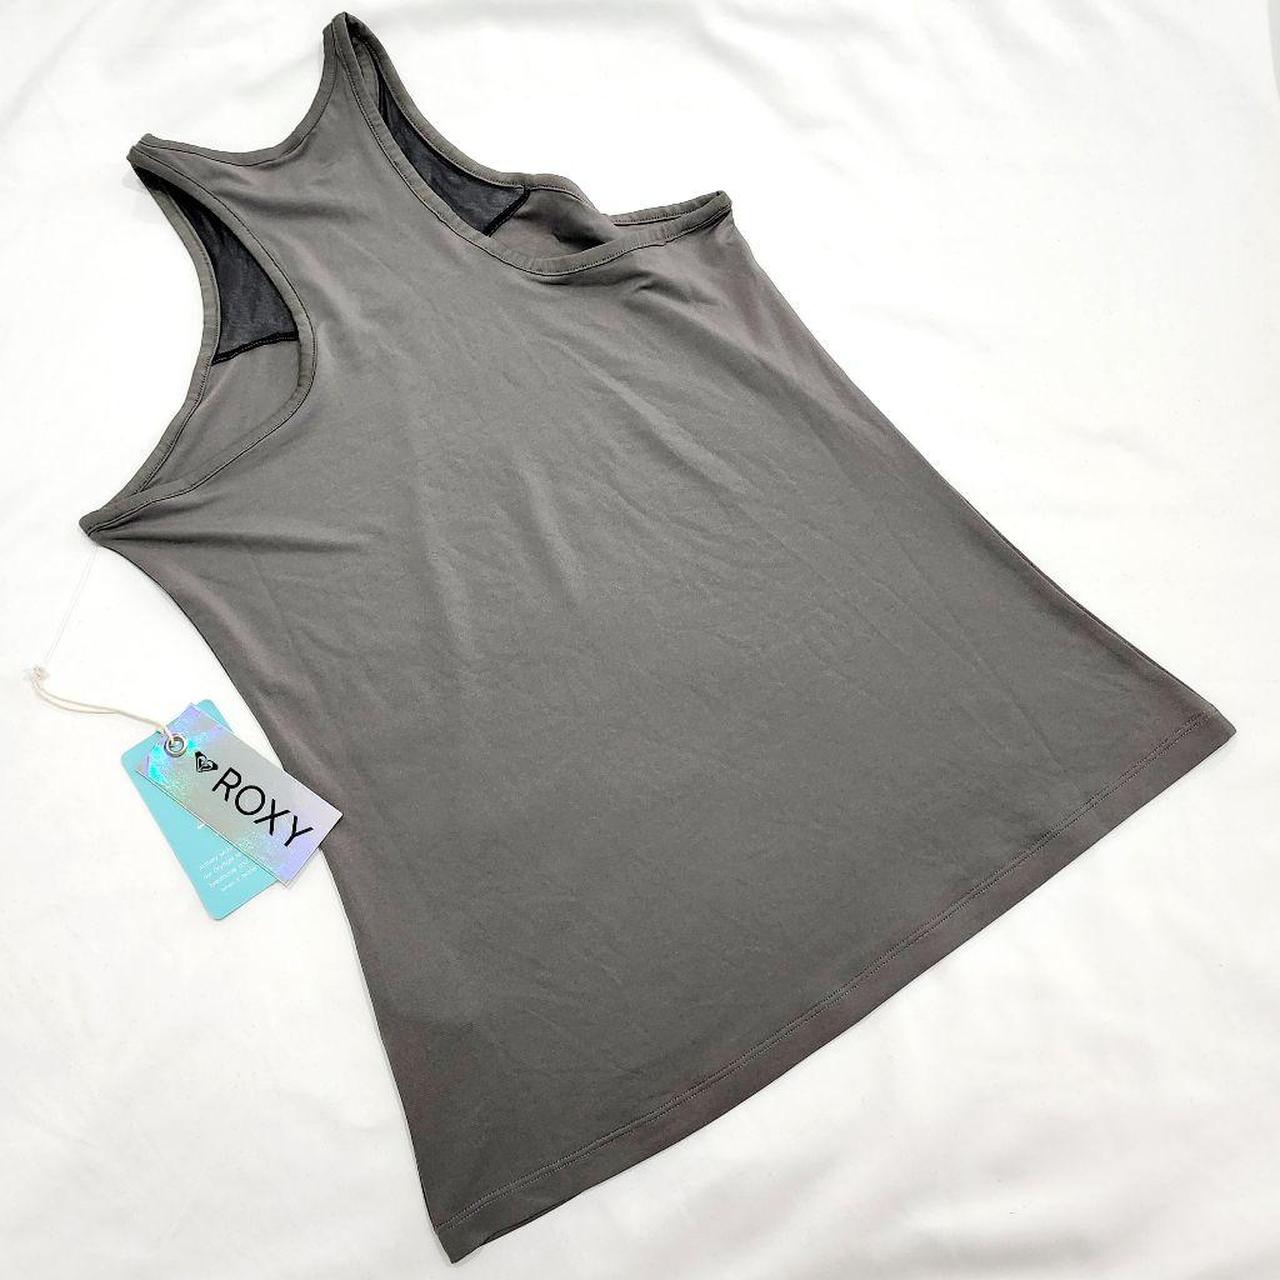 Product Image 2 - NWT and no defects

Brand: Roxy
Size: